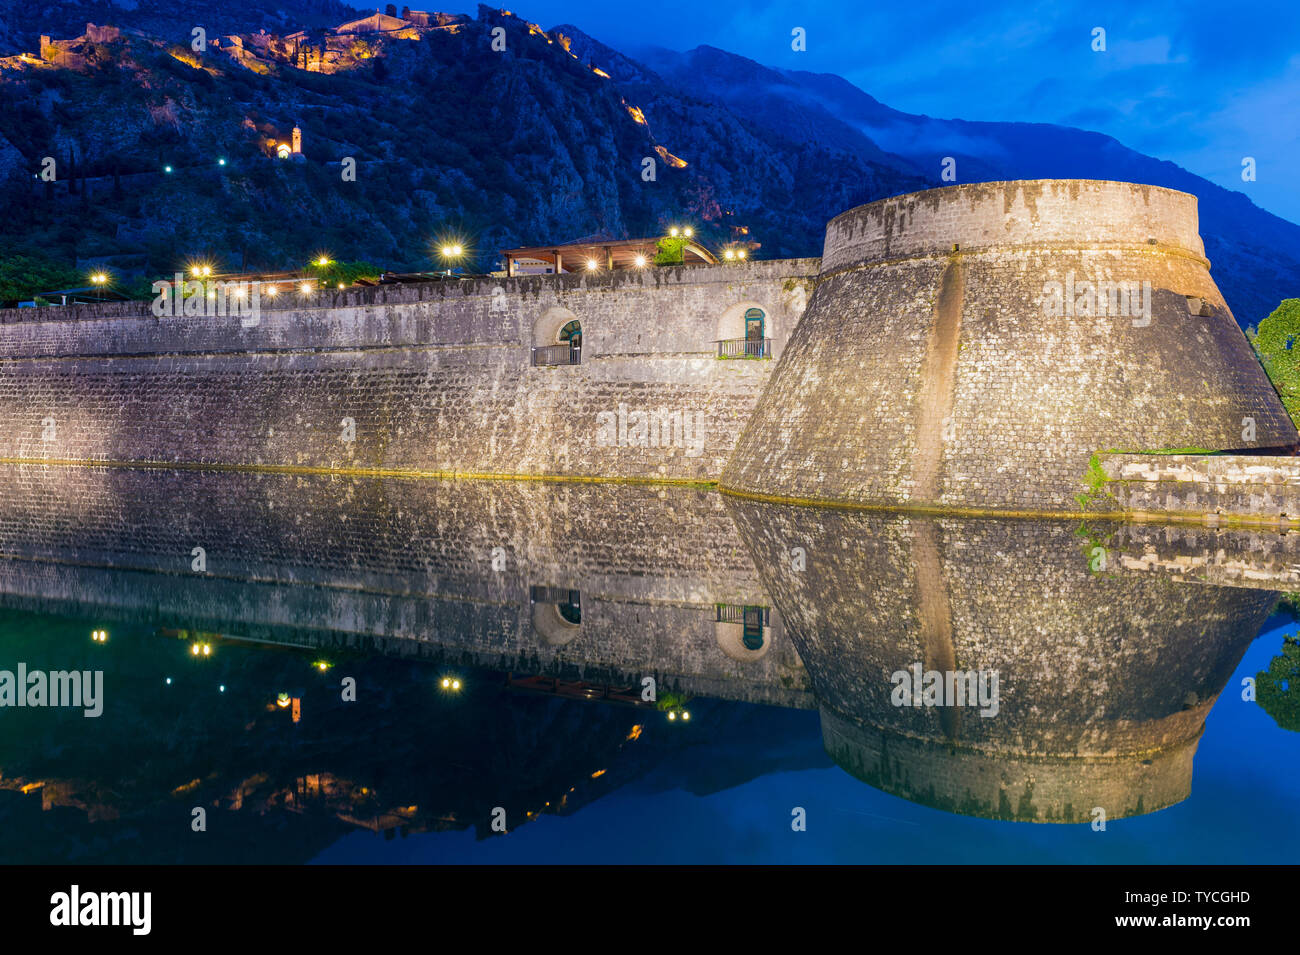 City ramparts of the old town, reflecting in the water at sunset, Unesco World Heritage Site, Kotor, Montenegro Stock Photo